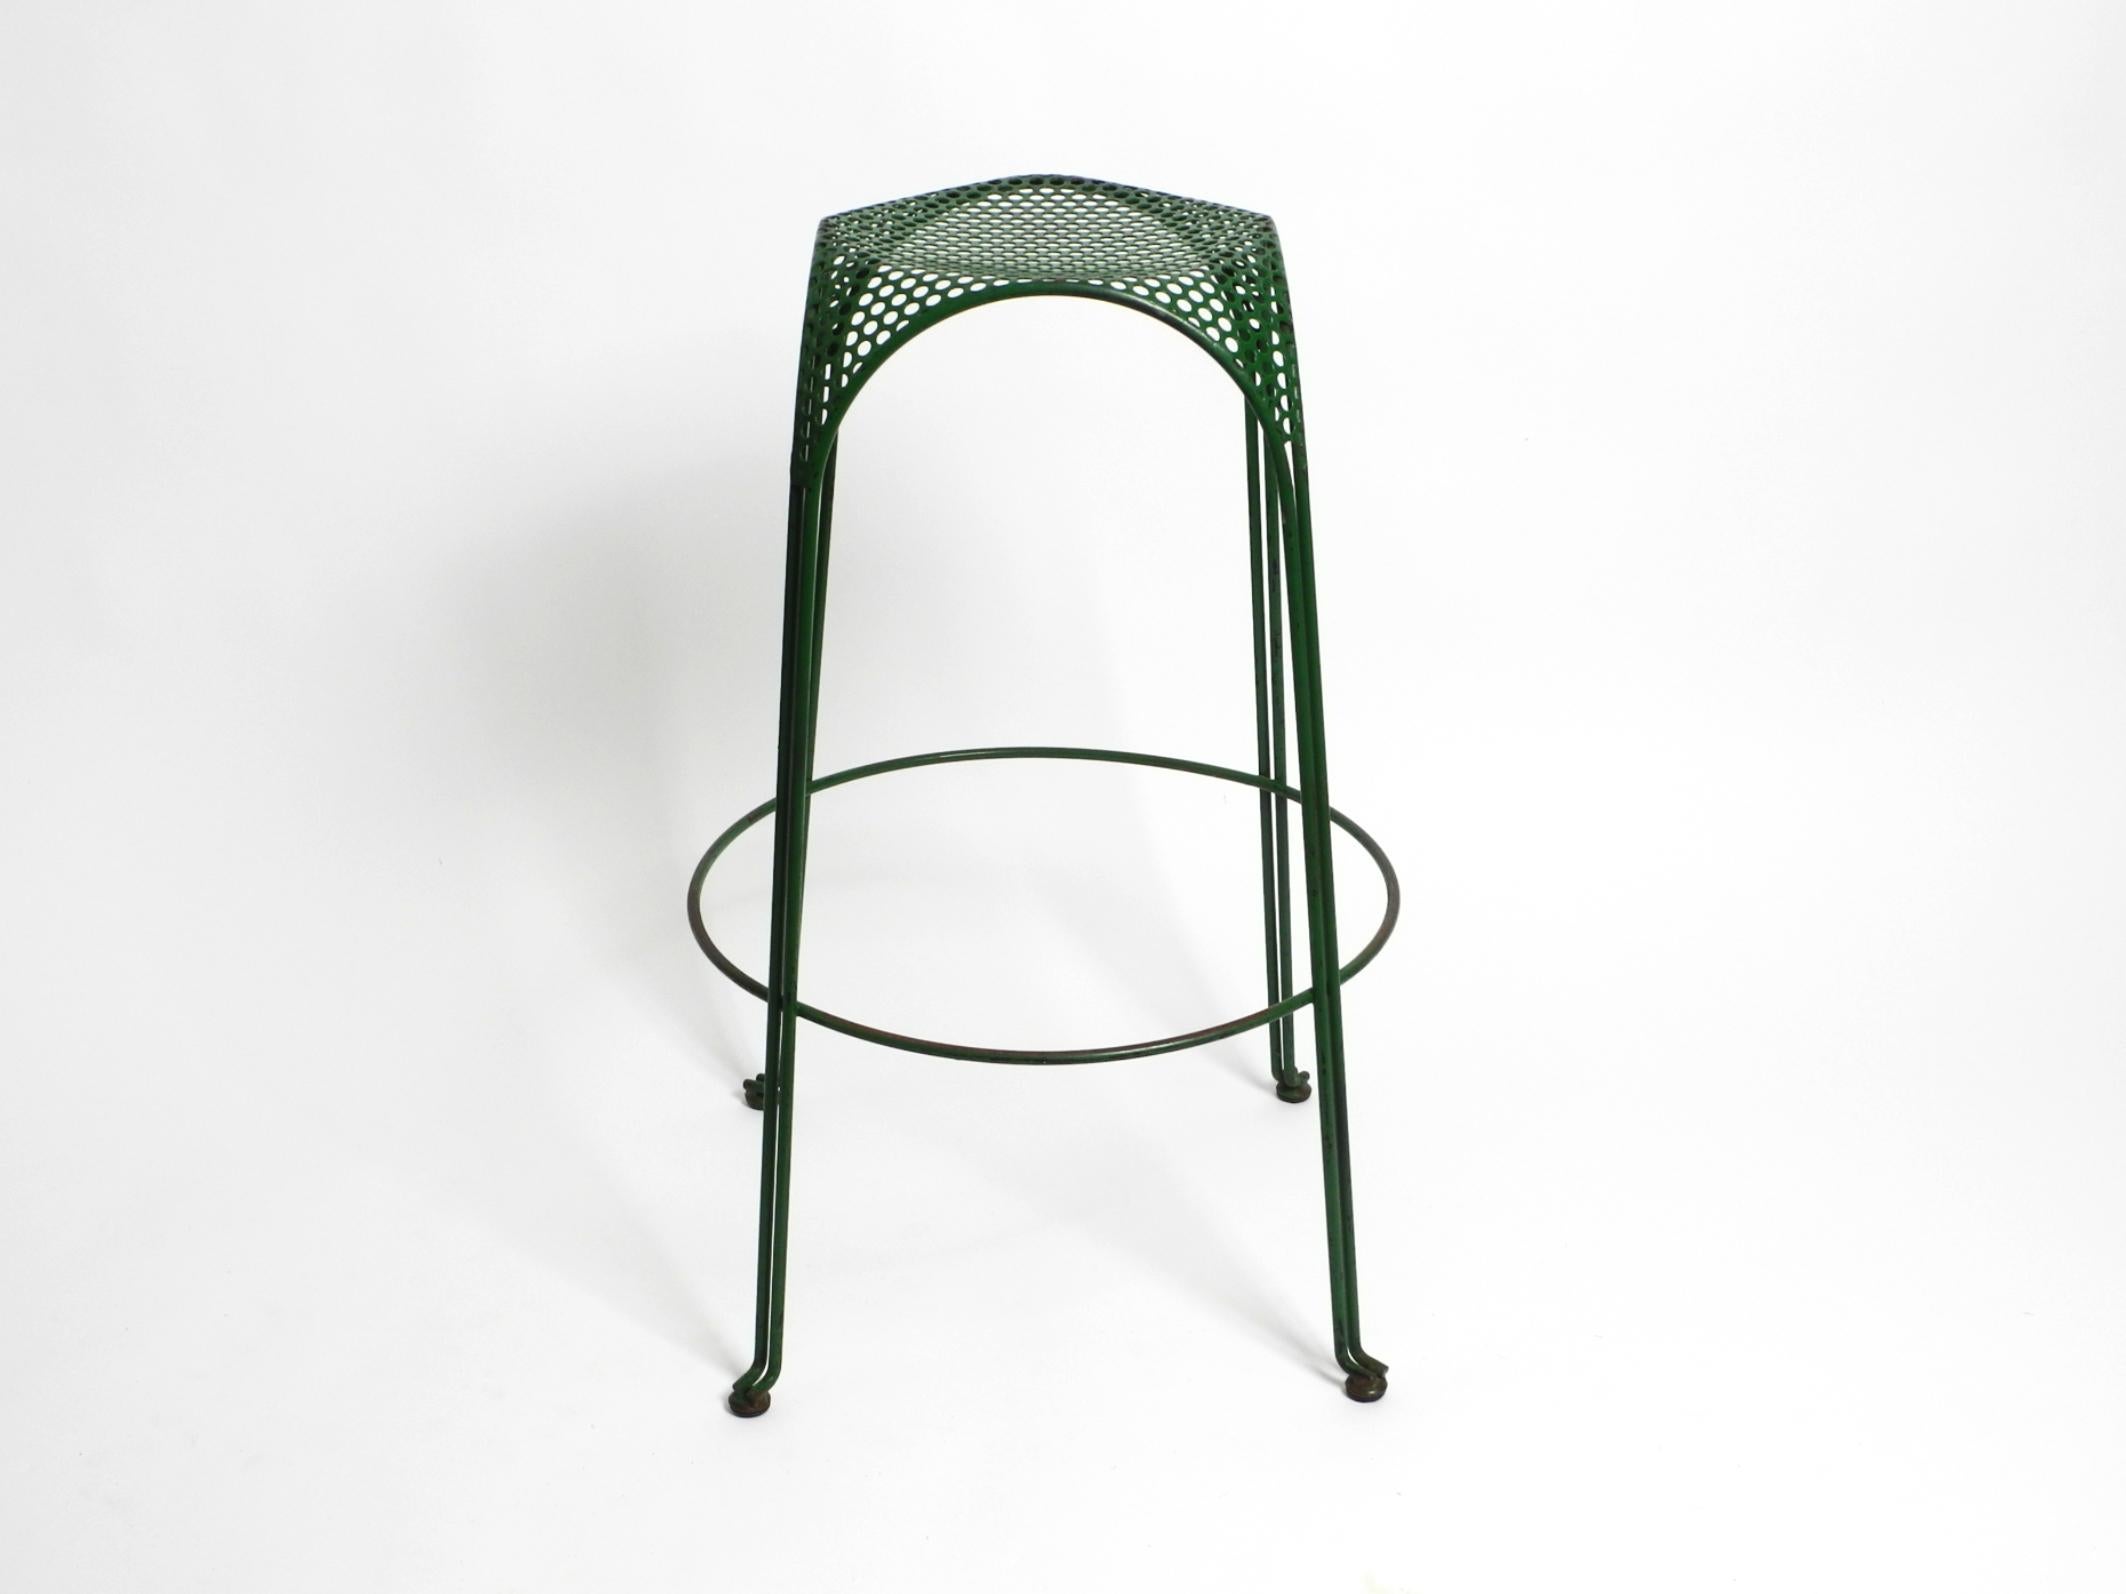 Rare bar stool made of green painted metal with perforated metal seat.
Beautiful Space Age design from the 1960s. Made in Italy.
Very well preserved with very few signs of wear.
Paint scuffs on the seat.
The paint on the footrest is also off in some